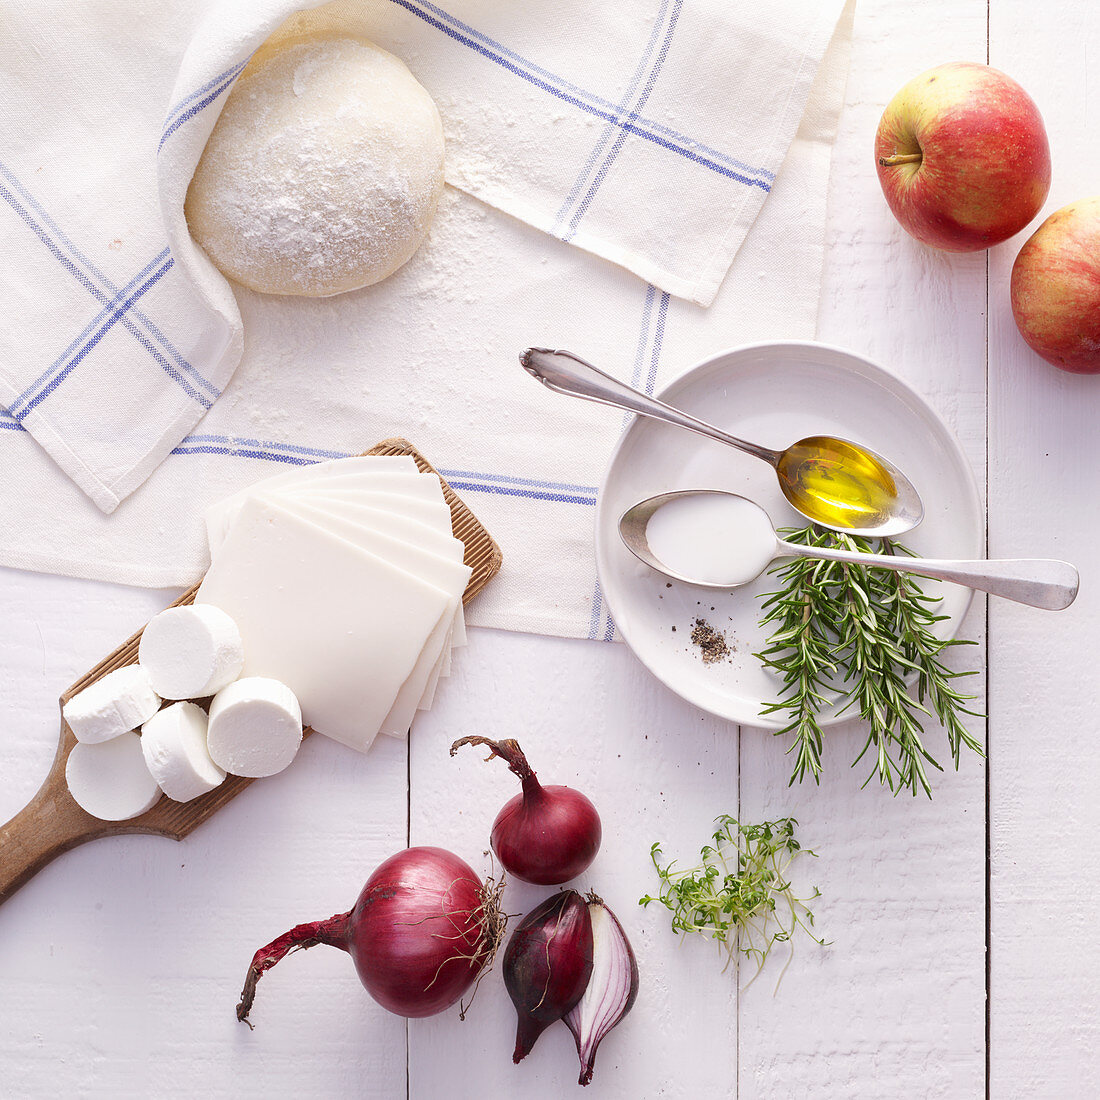 Ingredients for tarte flambée with apple, onions and goat’s cheese